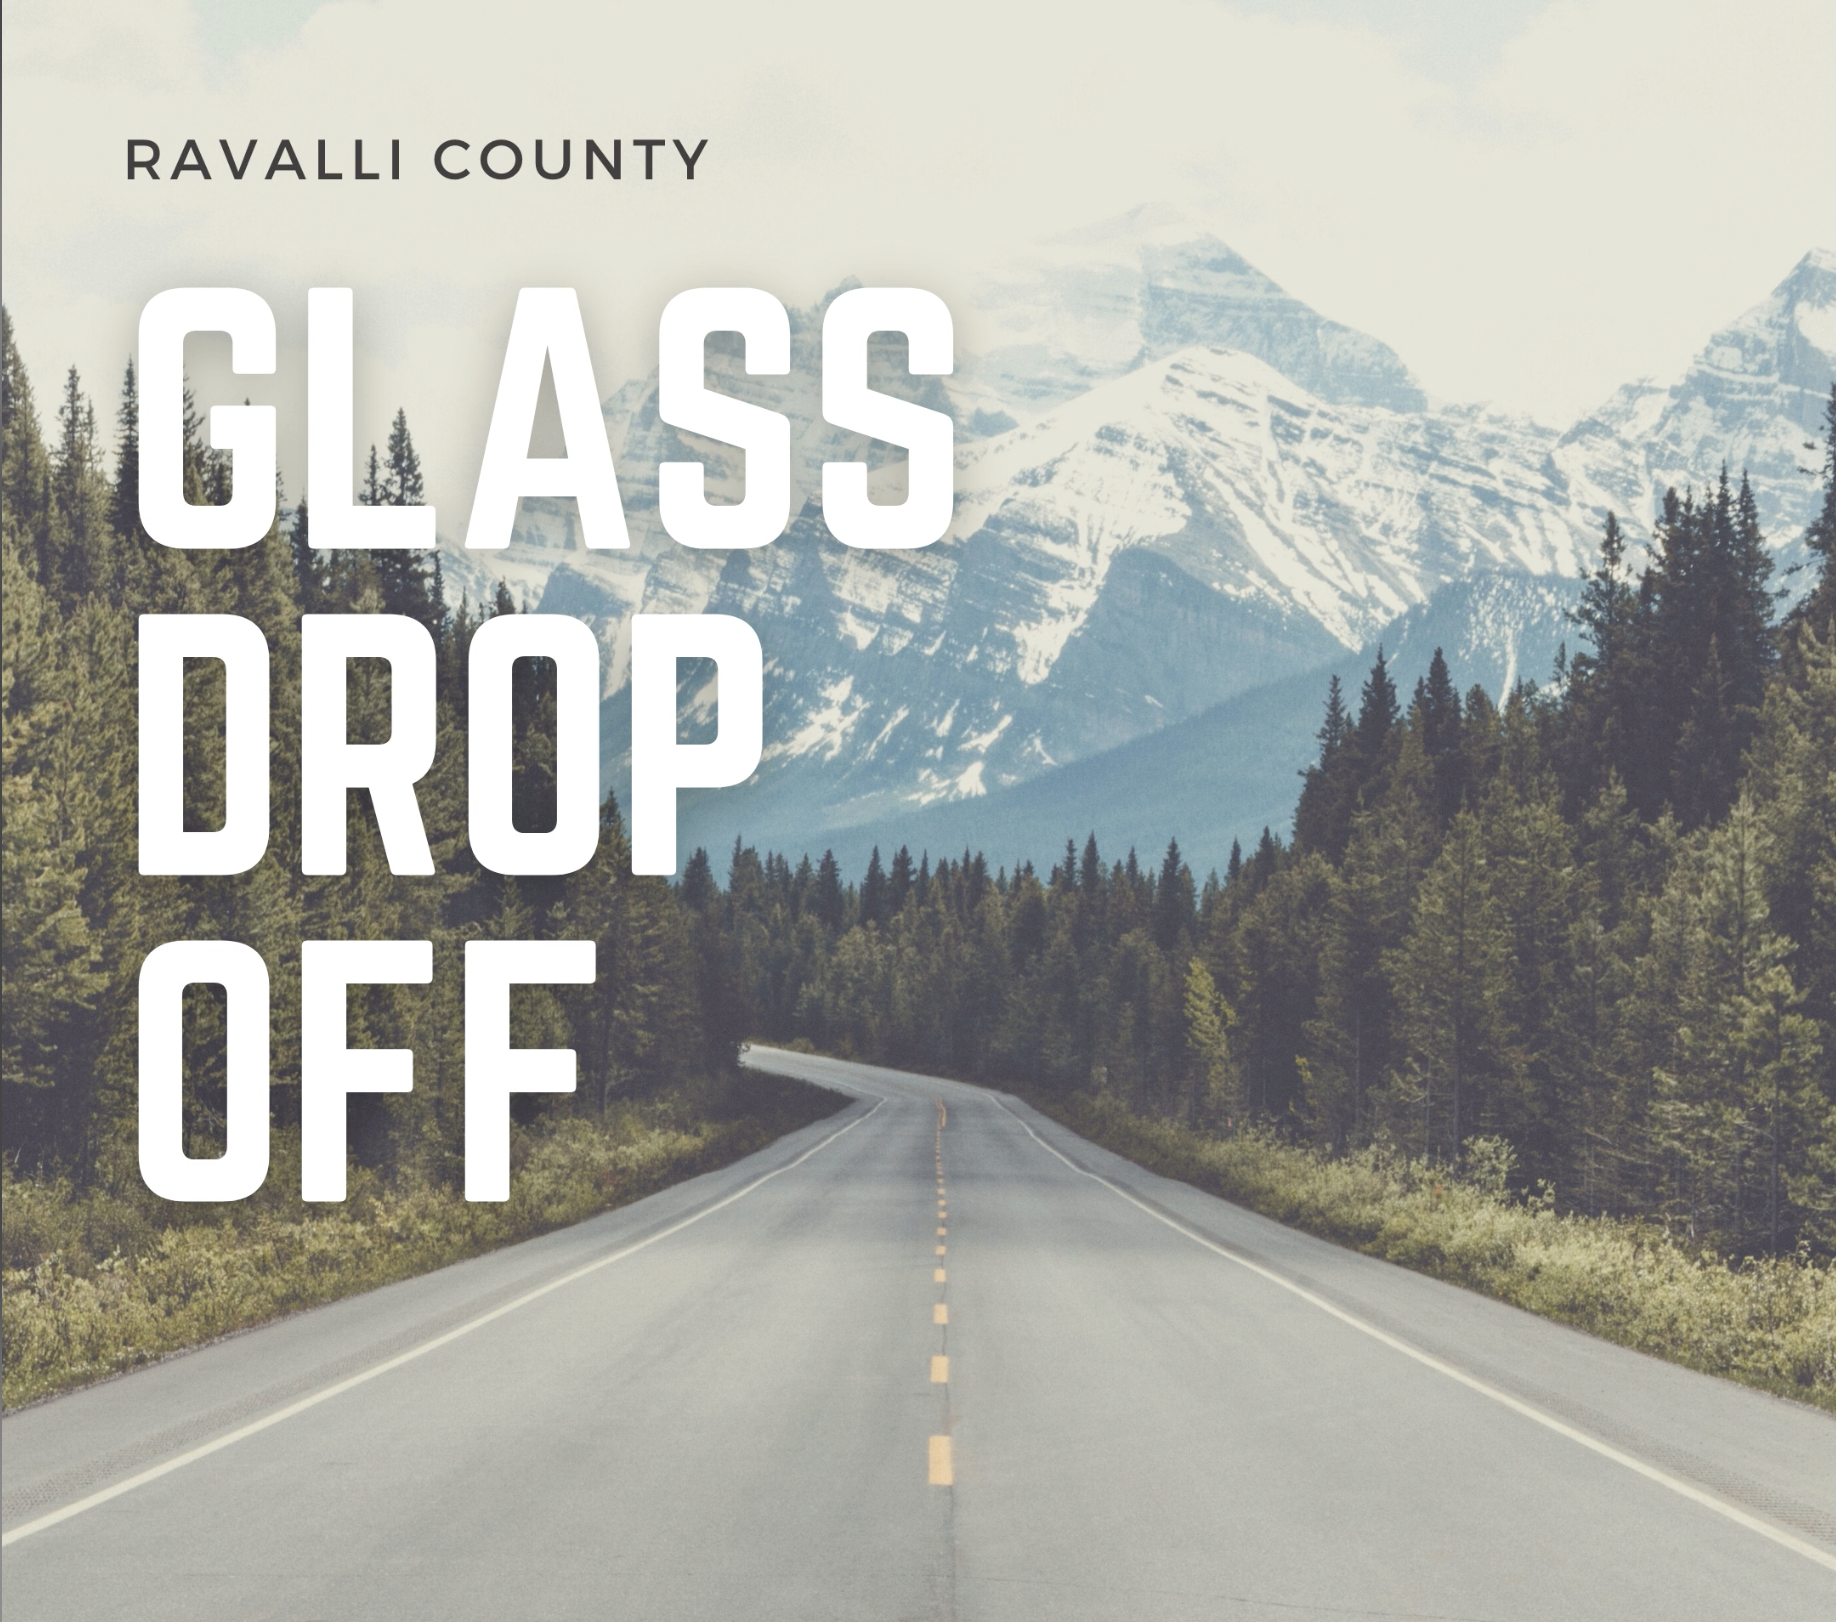 Ravalli County Glass Drop Event on October 3rd, 2020